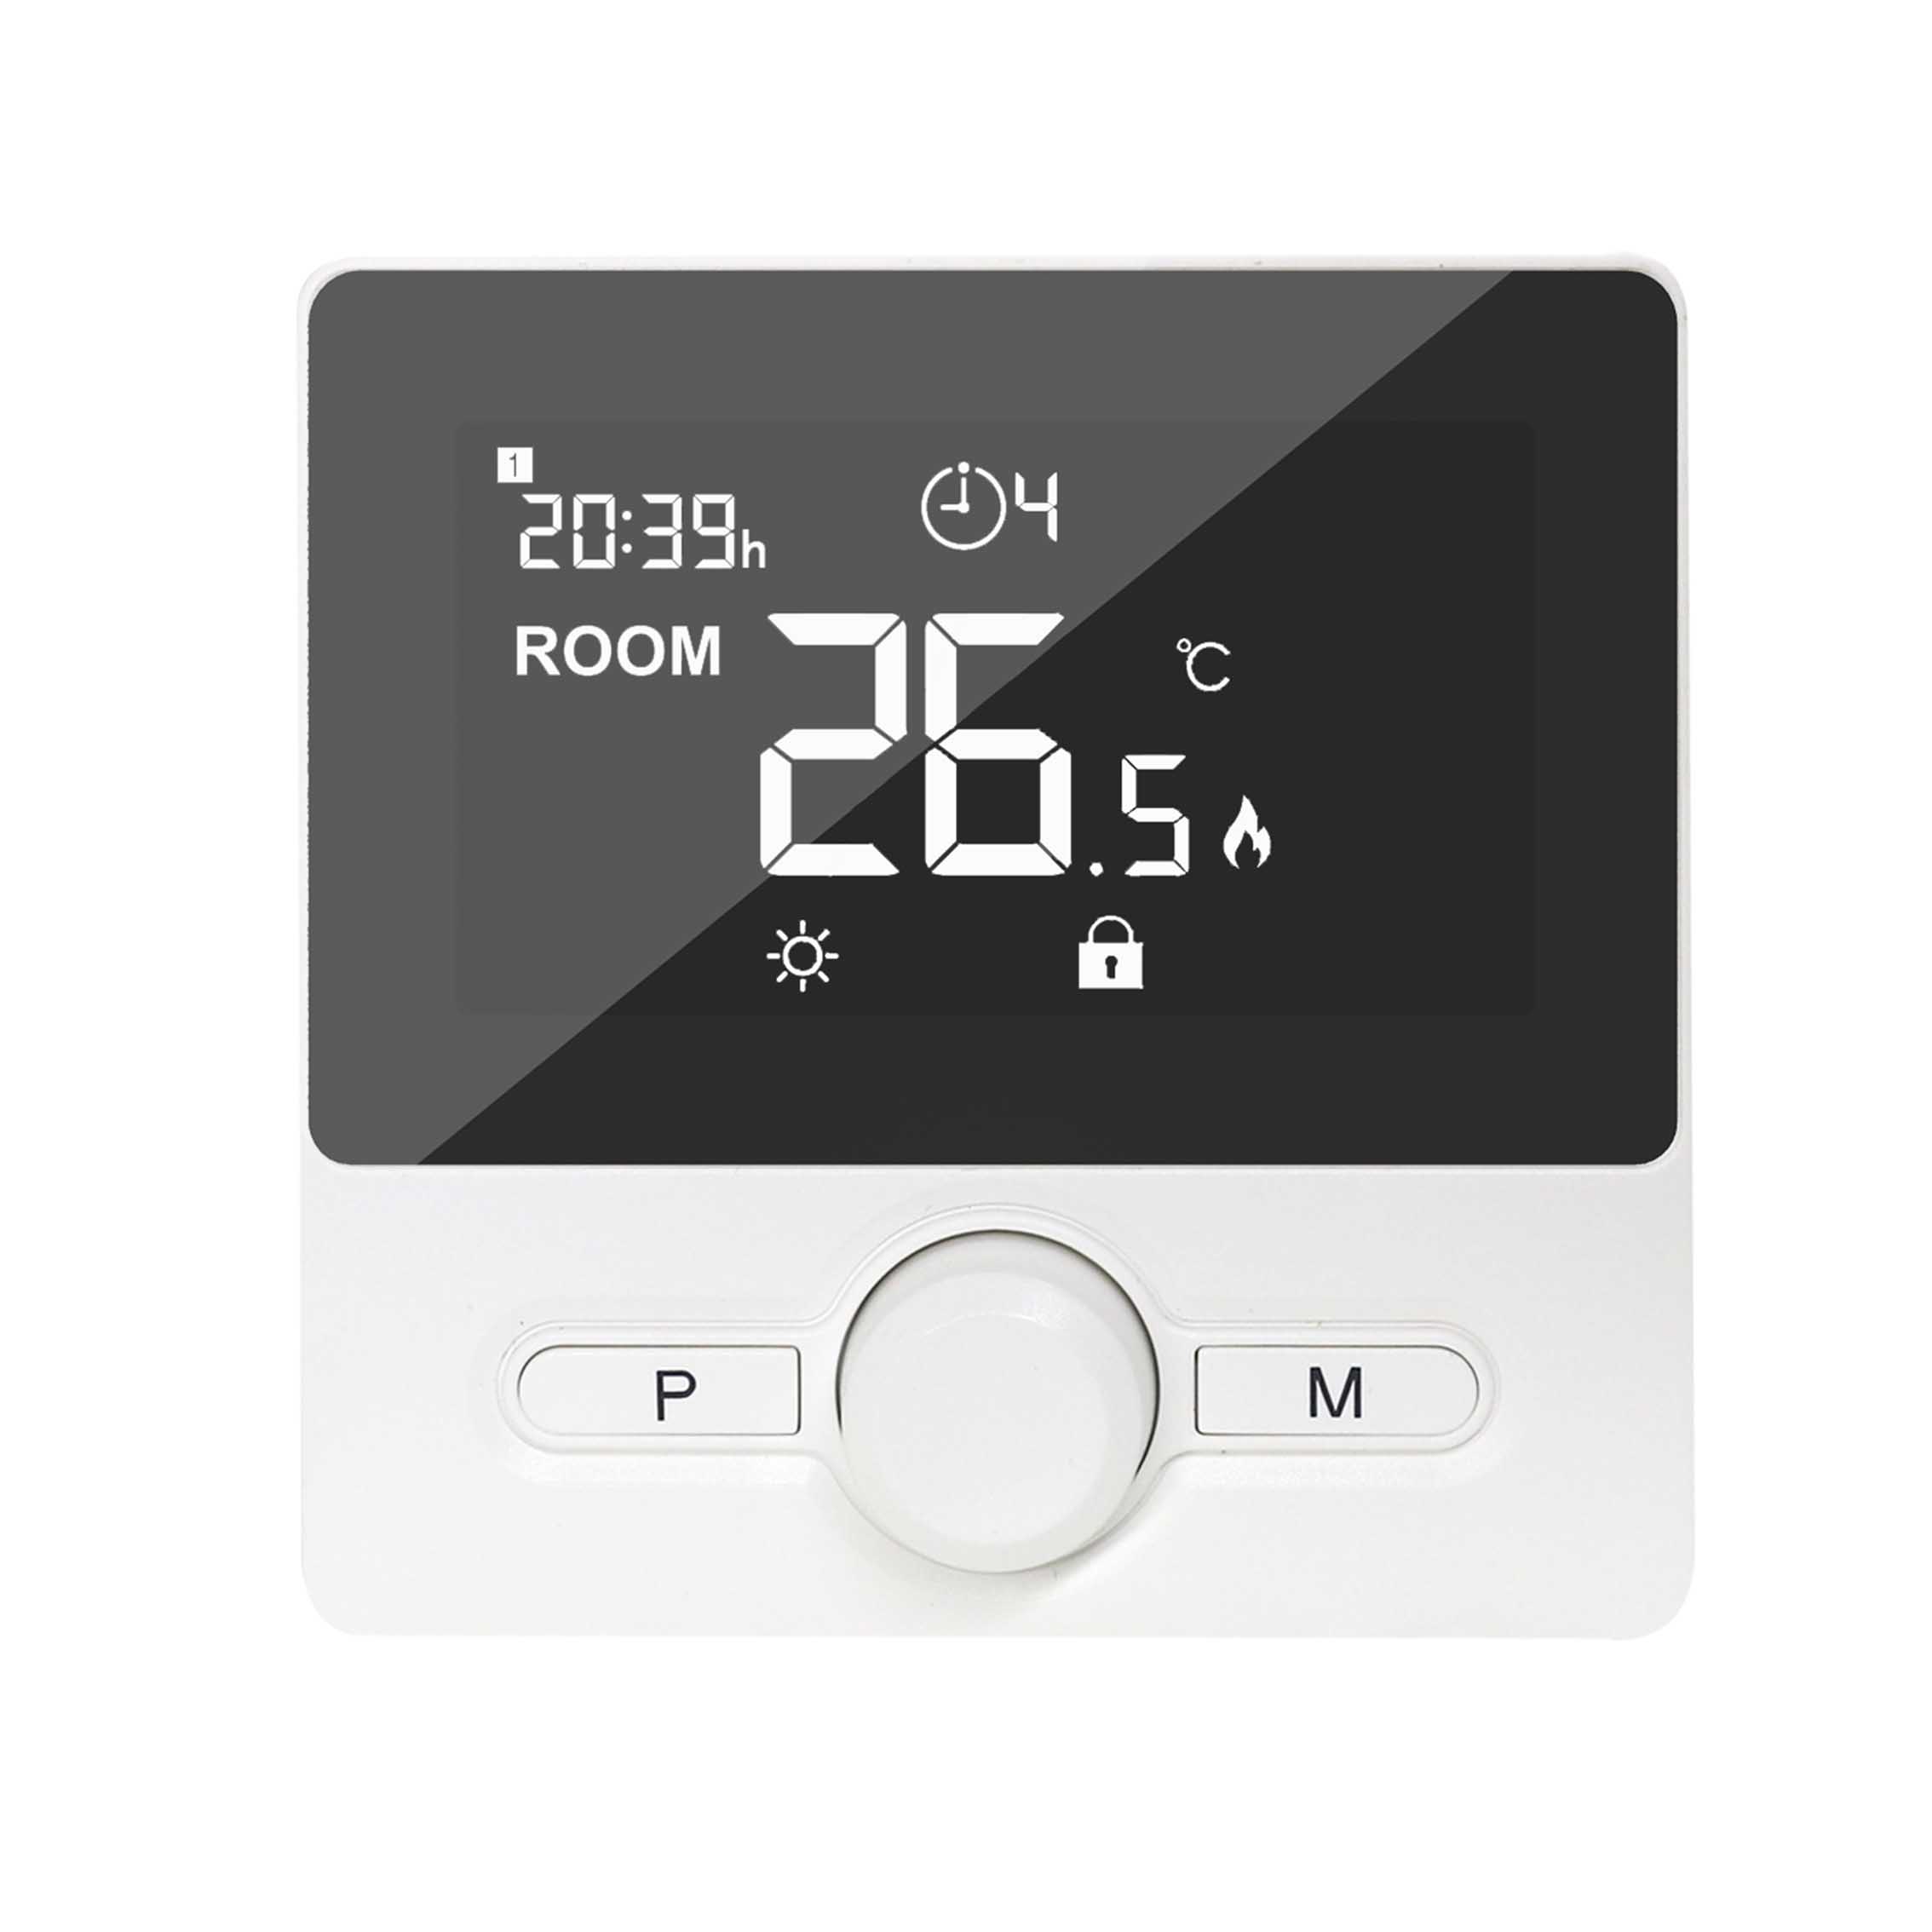 High Quality Glass Surface LCD Screen Programmable Tuya WiFi Dia Setting Room Thermostat for Boiler Heating